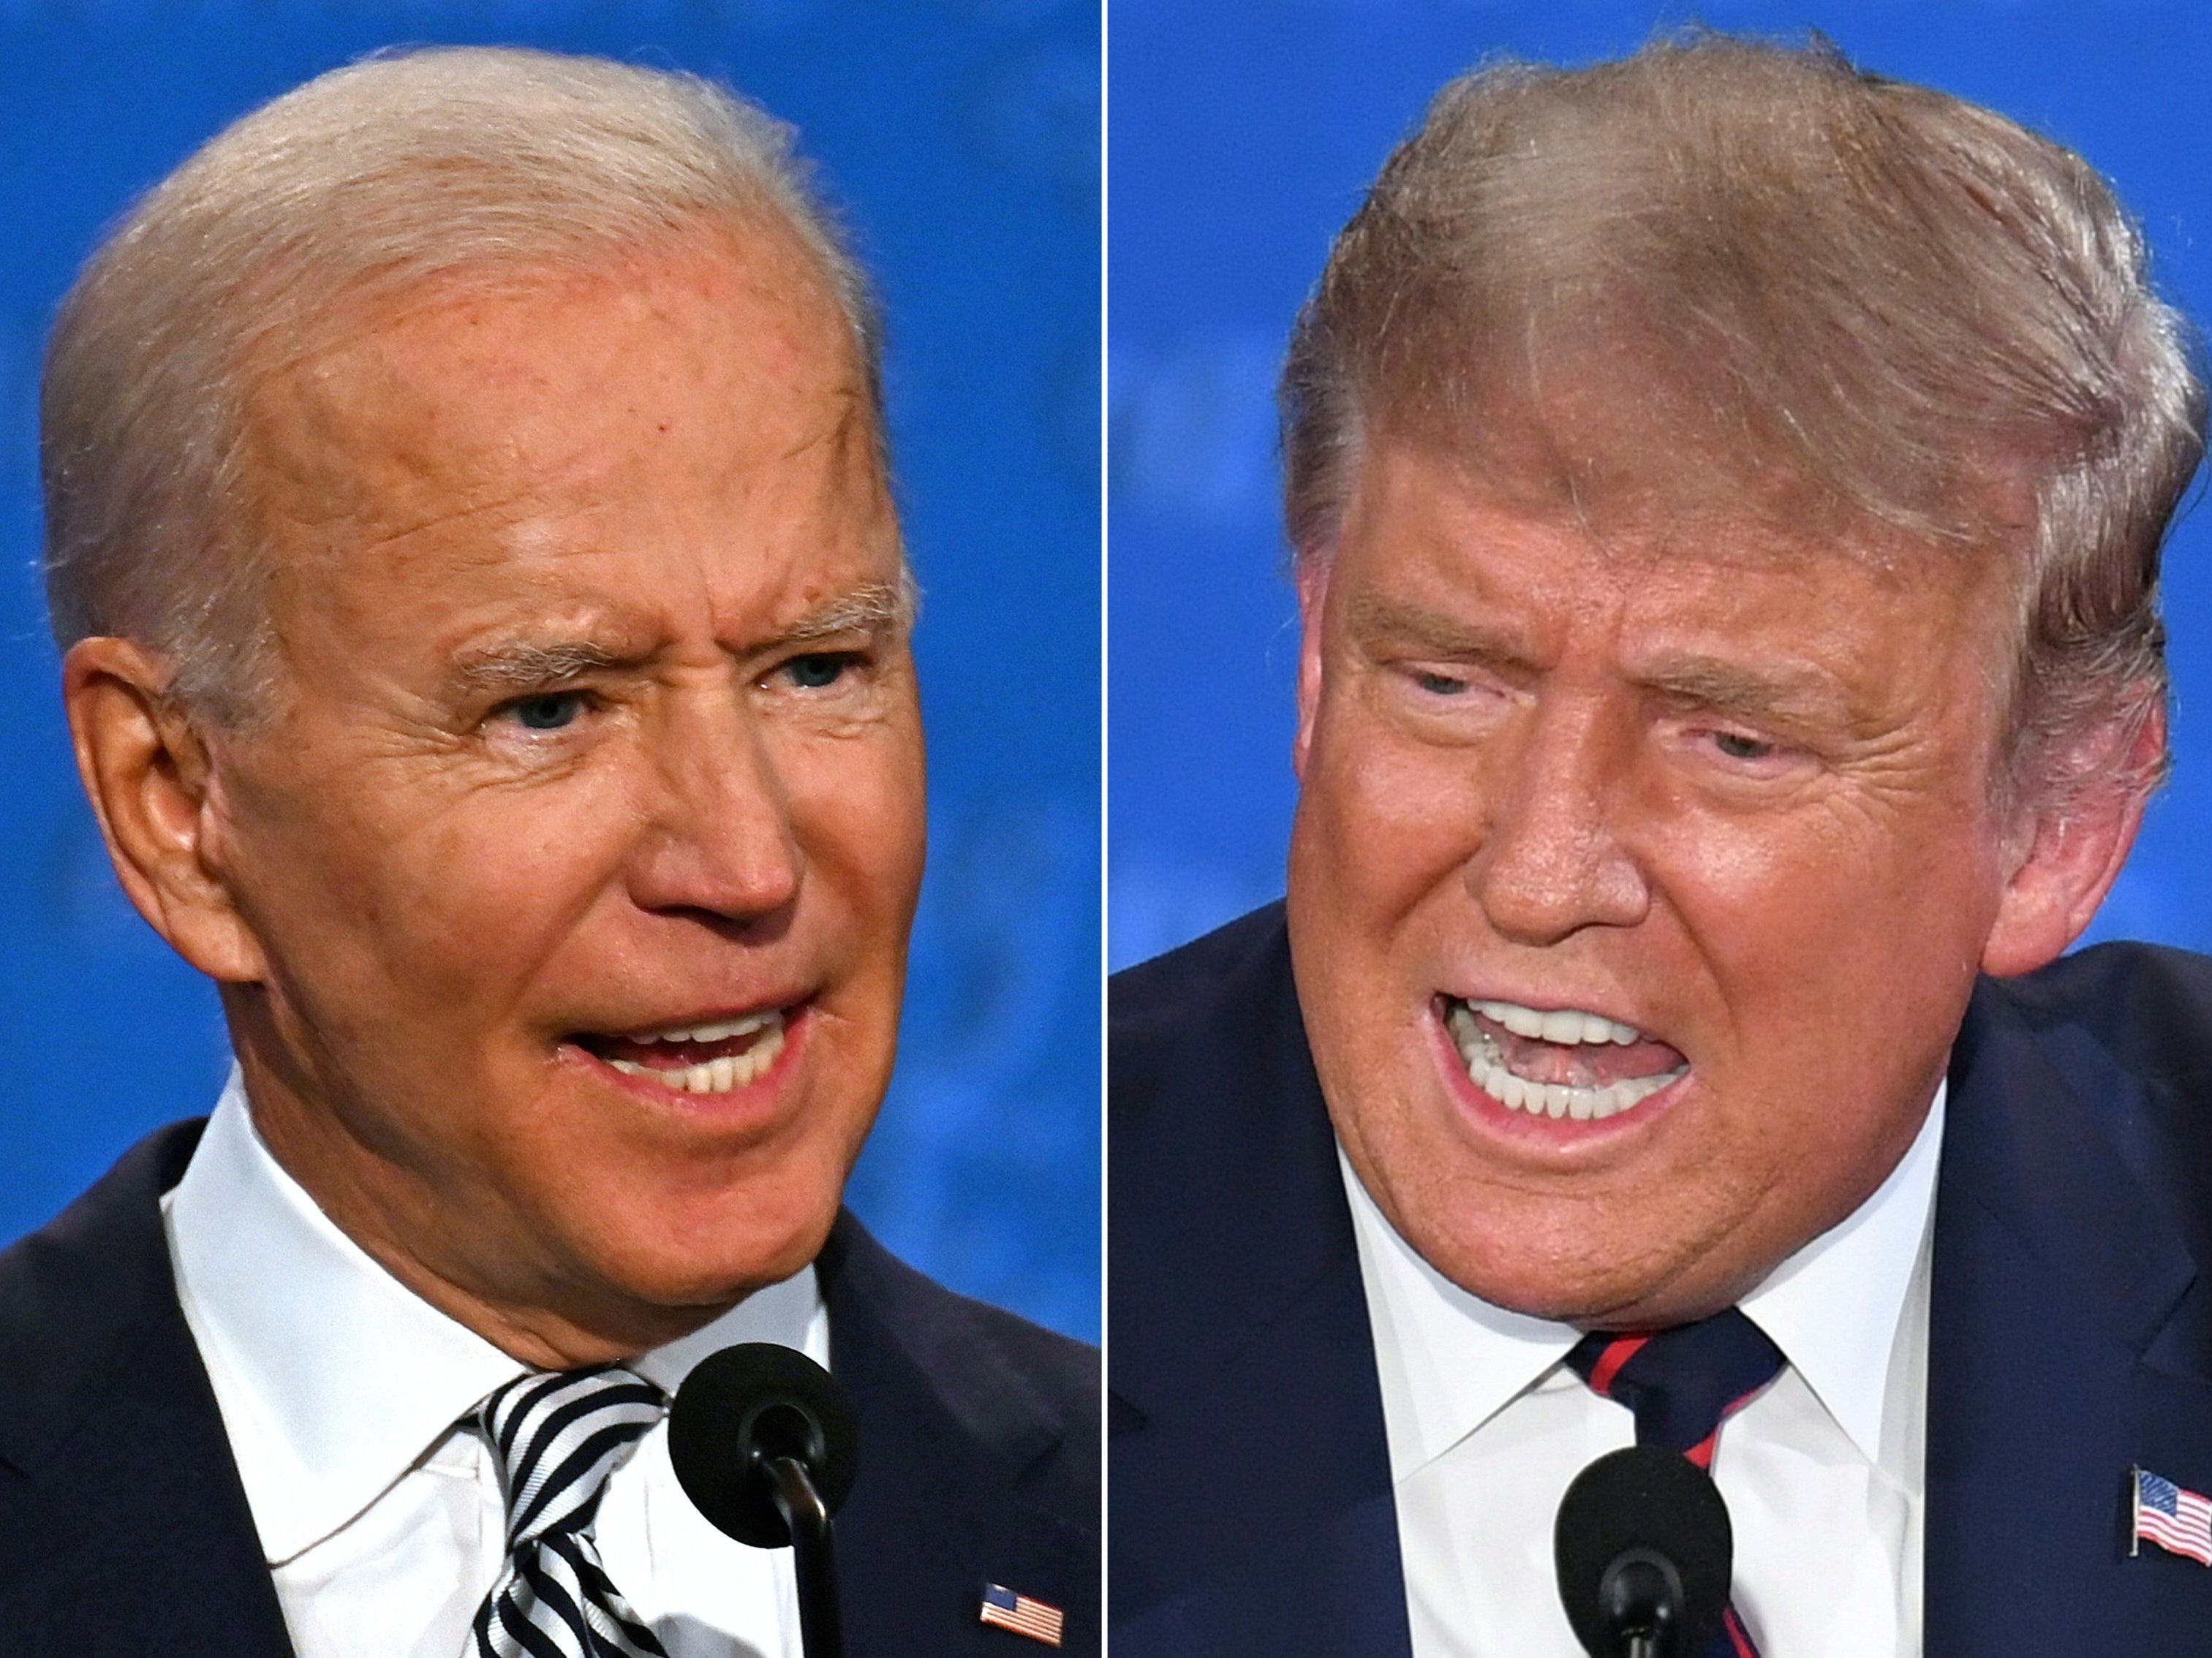 Democratic Presidential candidate and former US Vice President Joe Biden (L) and US President Donald Trump speak during the first presidential debate